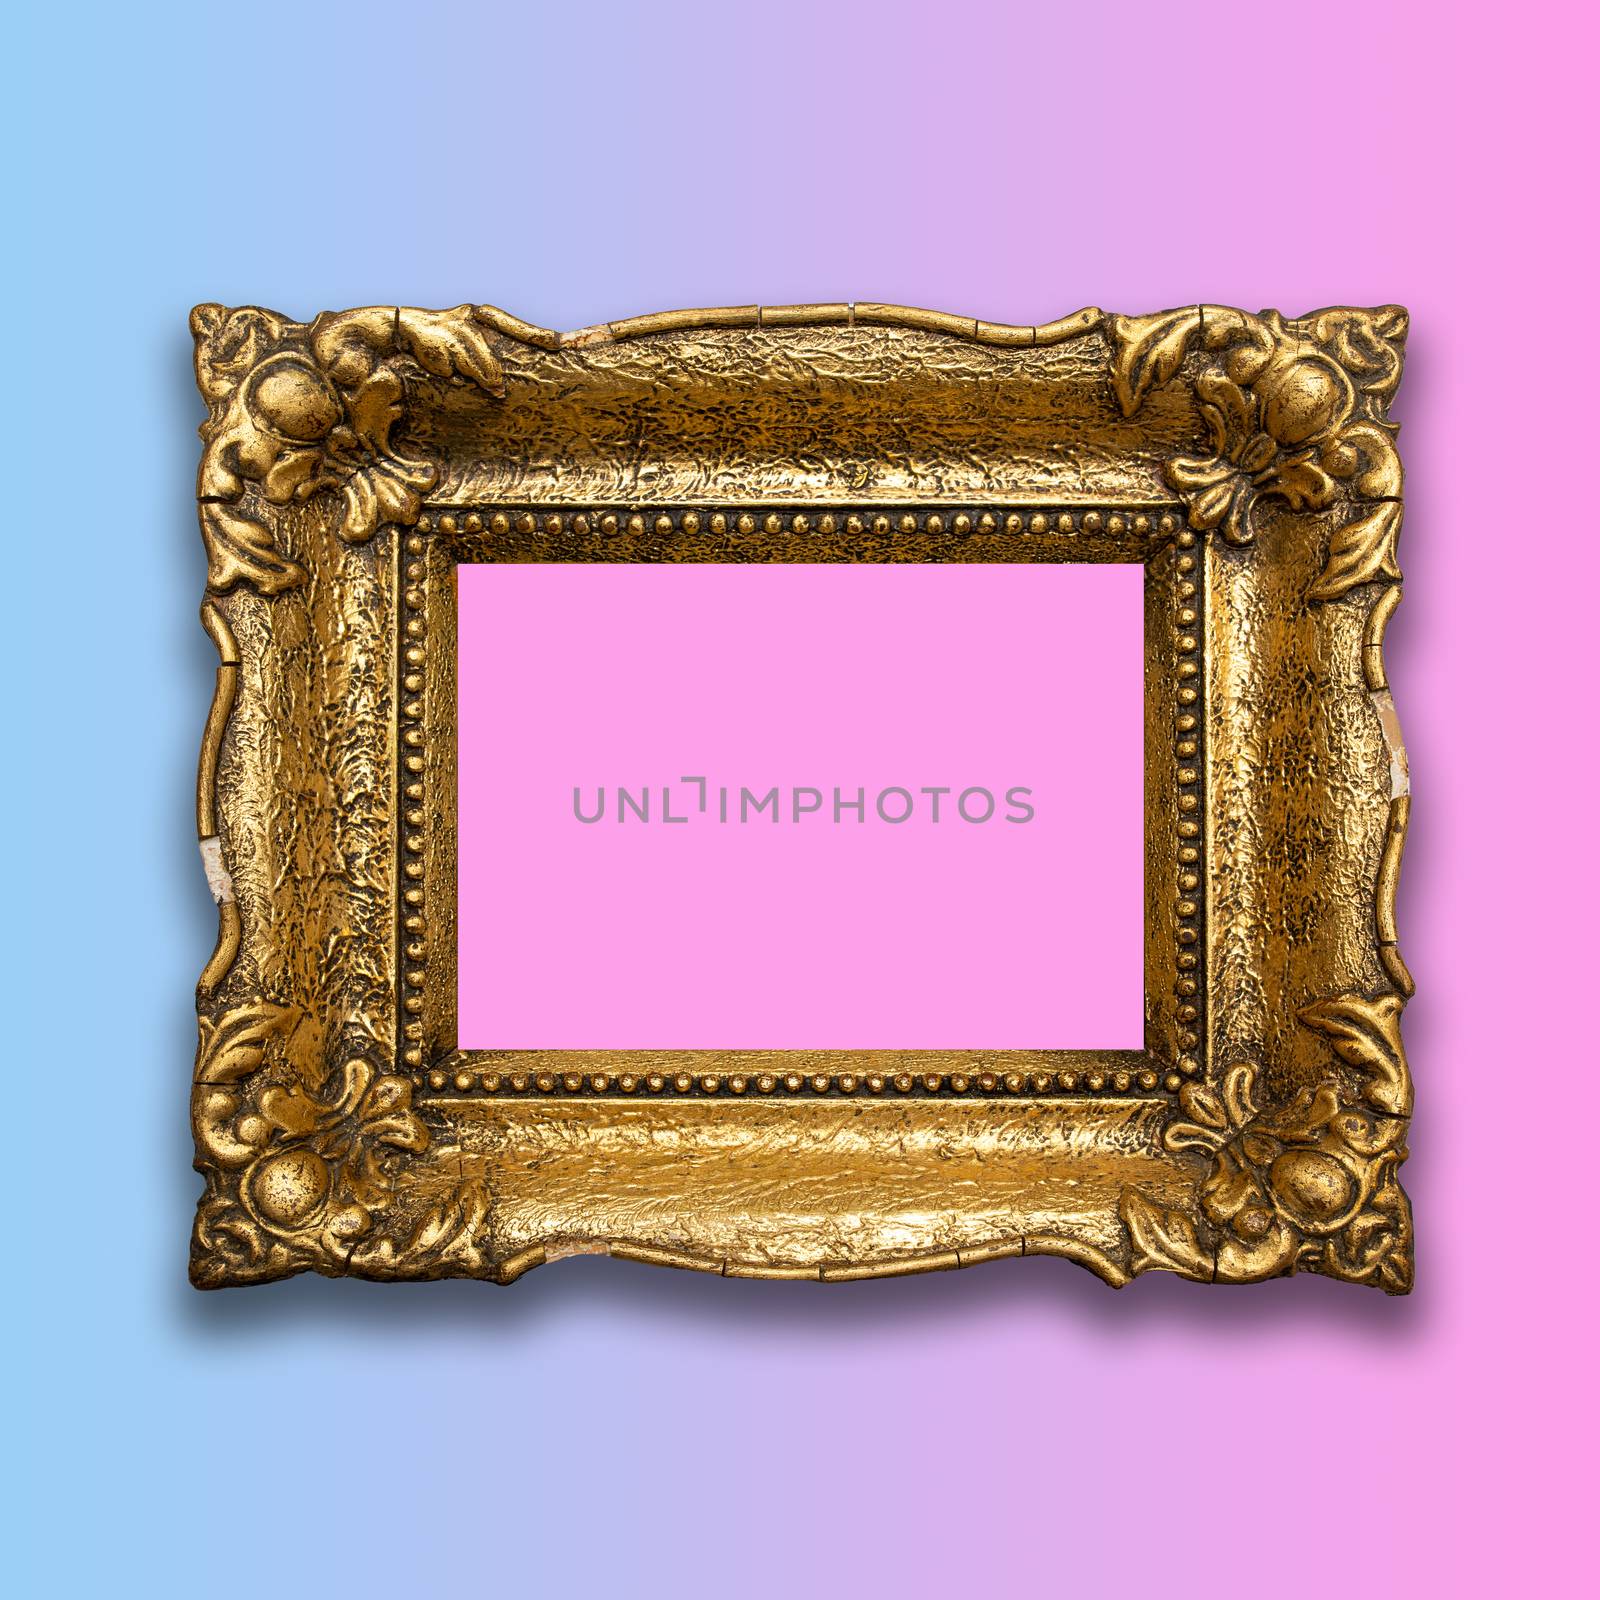 Retro Old Gold Frame On Blue Pink Background Stock Photo